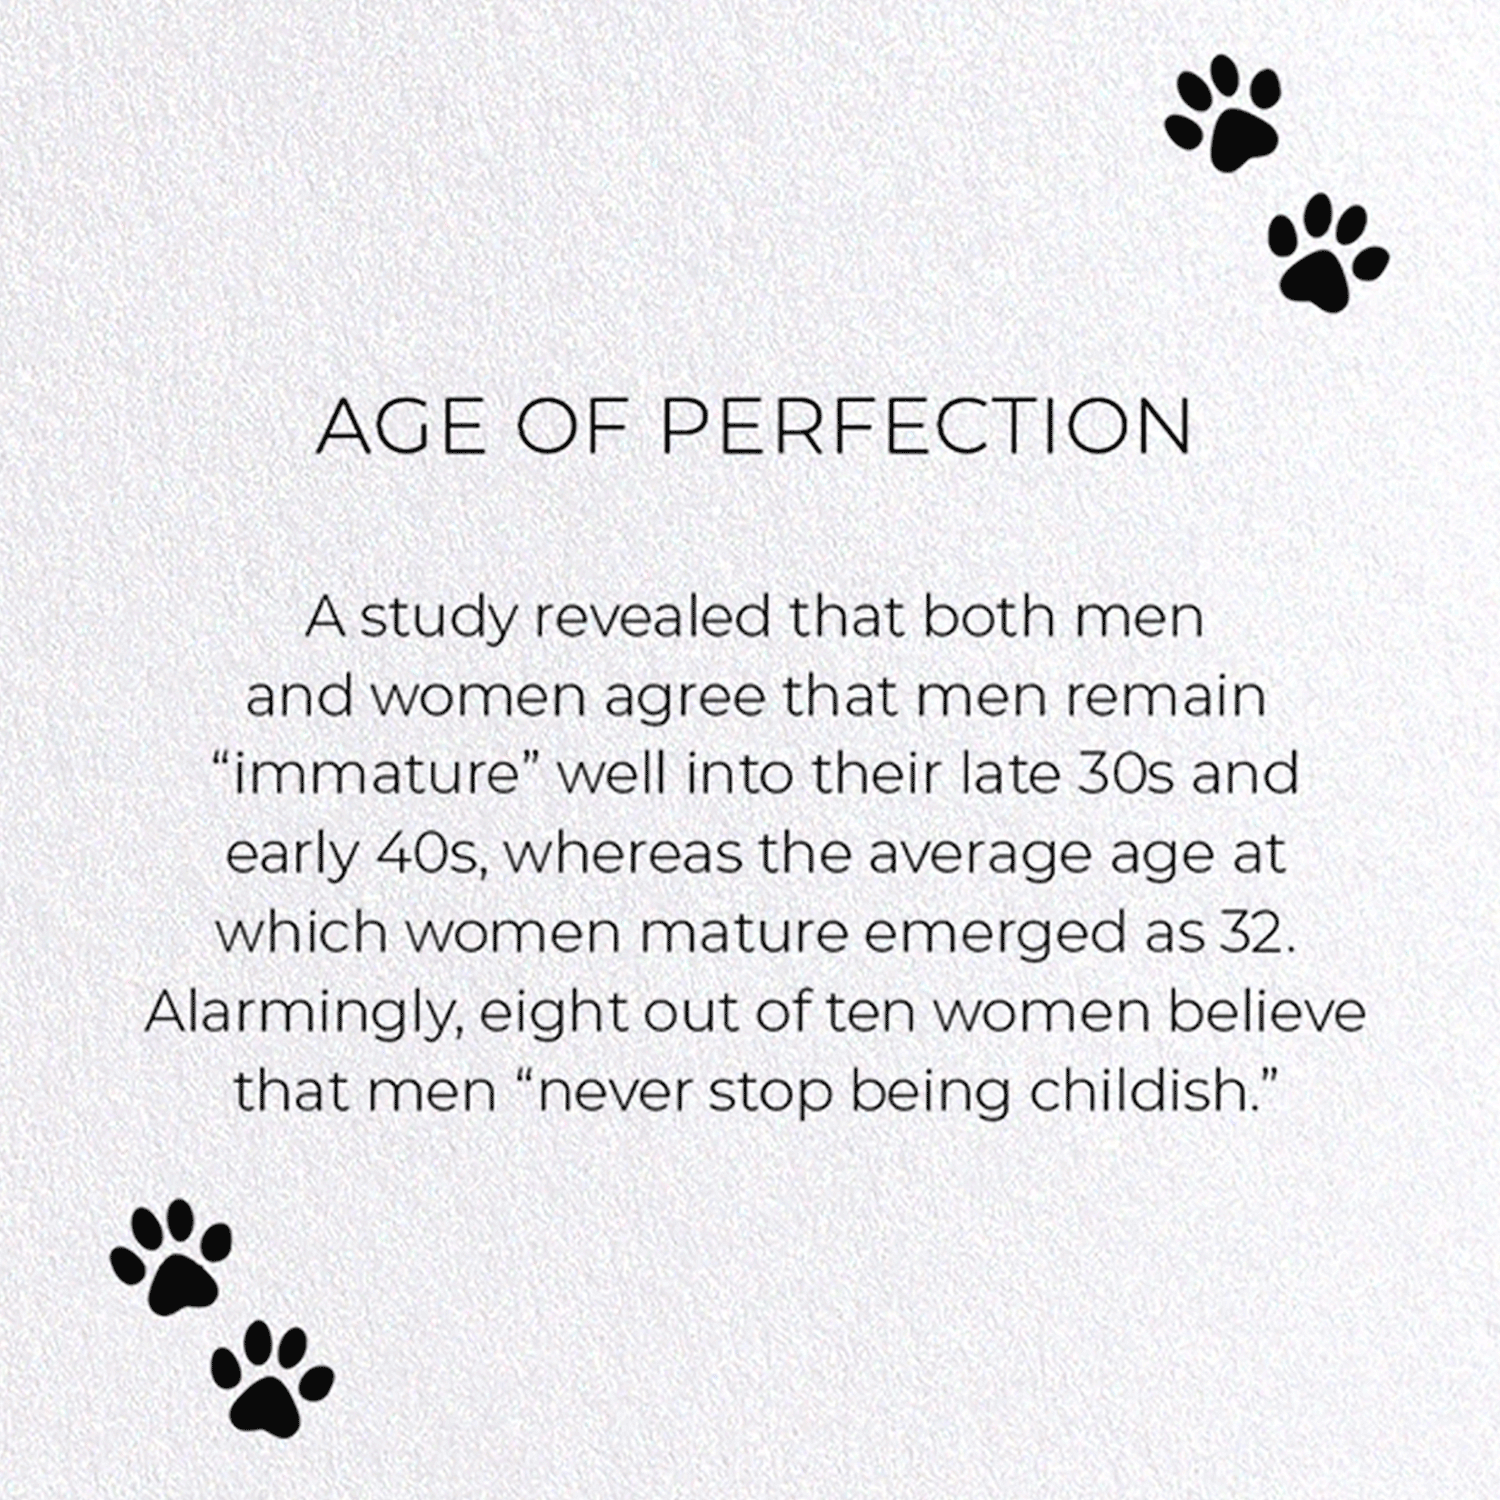 AGE OF PERFECTION